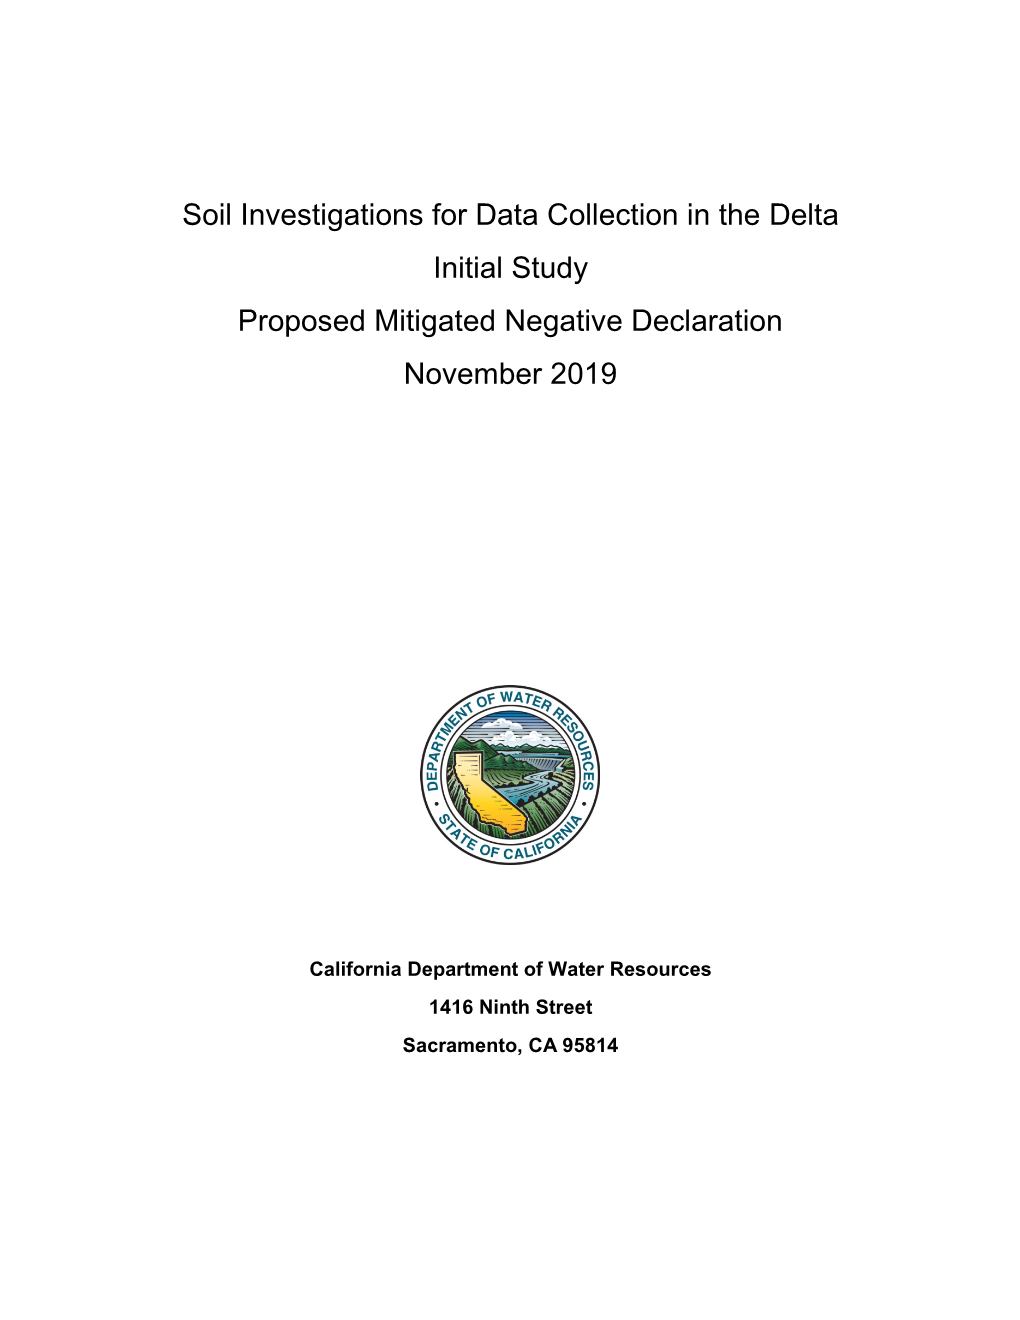 Soil Investigations for Data Collection in the Delta Initial Study An